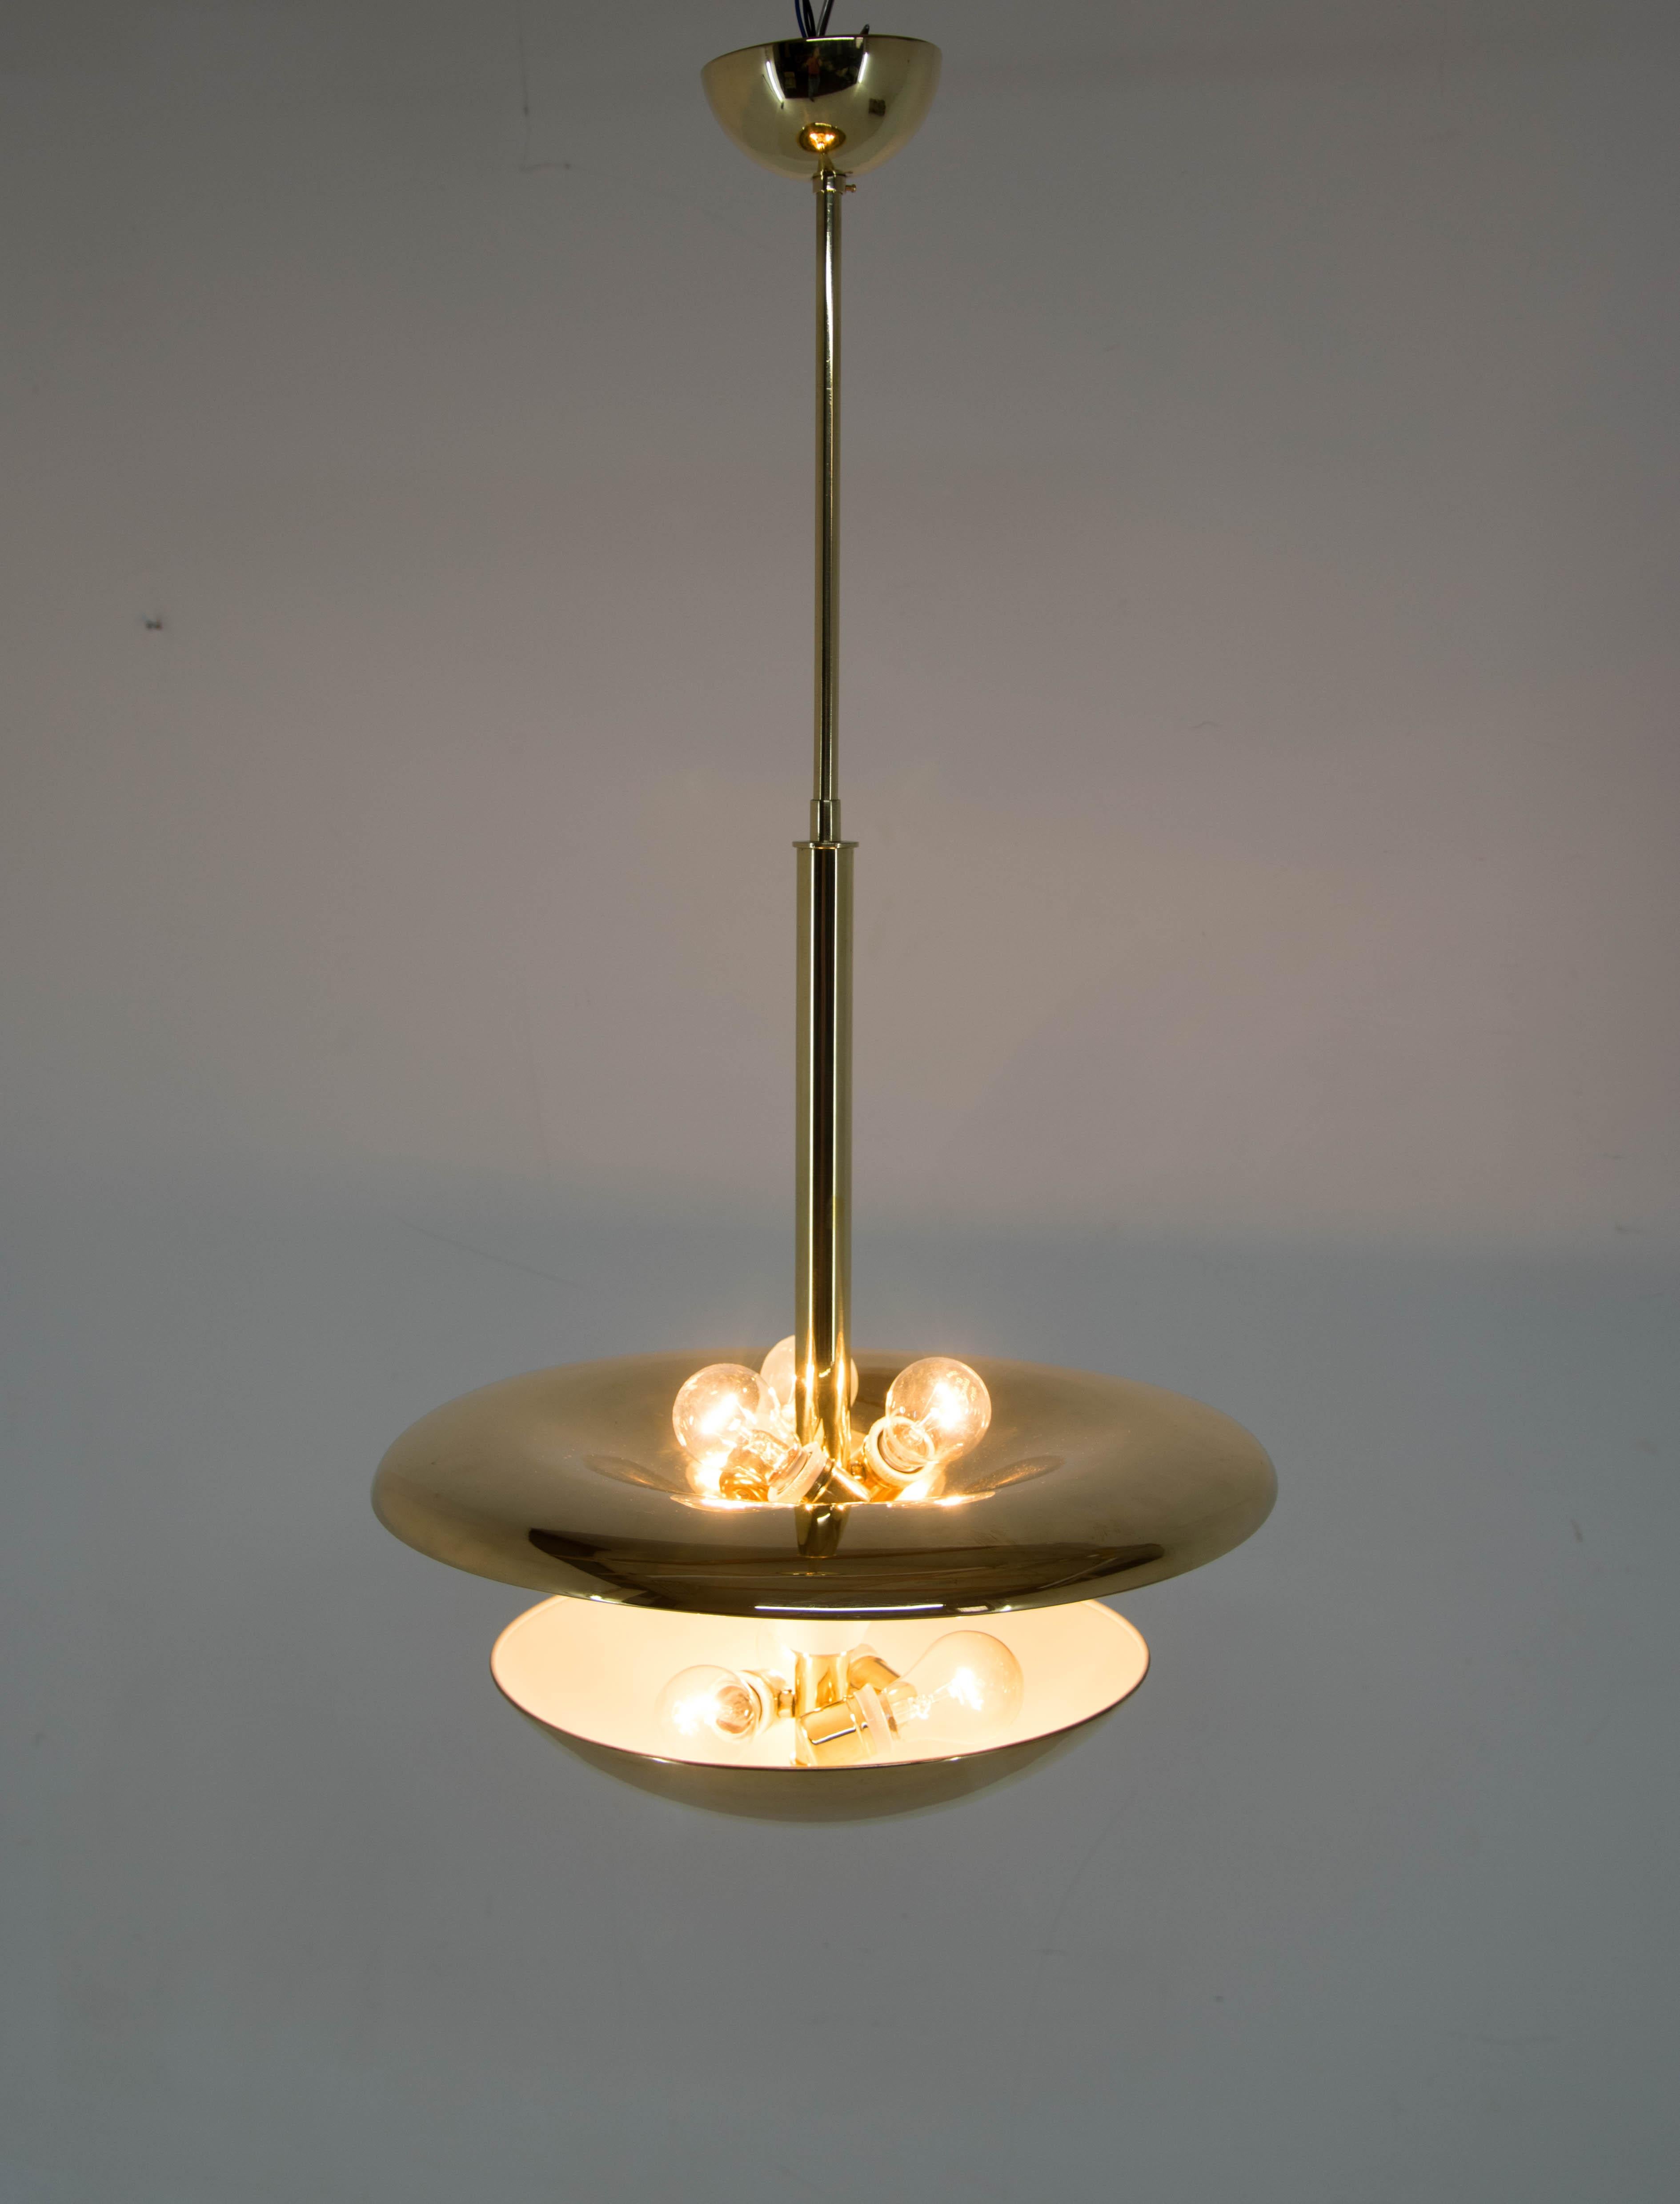 Rare Brass Bauhaus Chandelier by Franta Anyz, 1920s, Restored In Good Condition For Sale In Praha, CZ